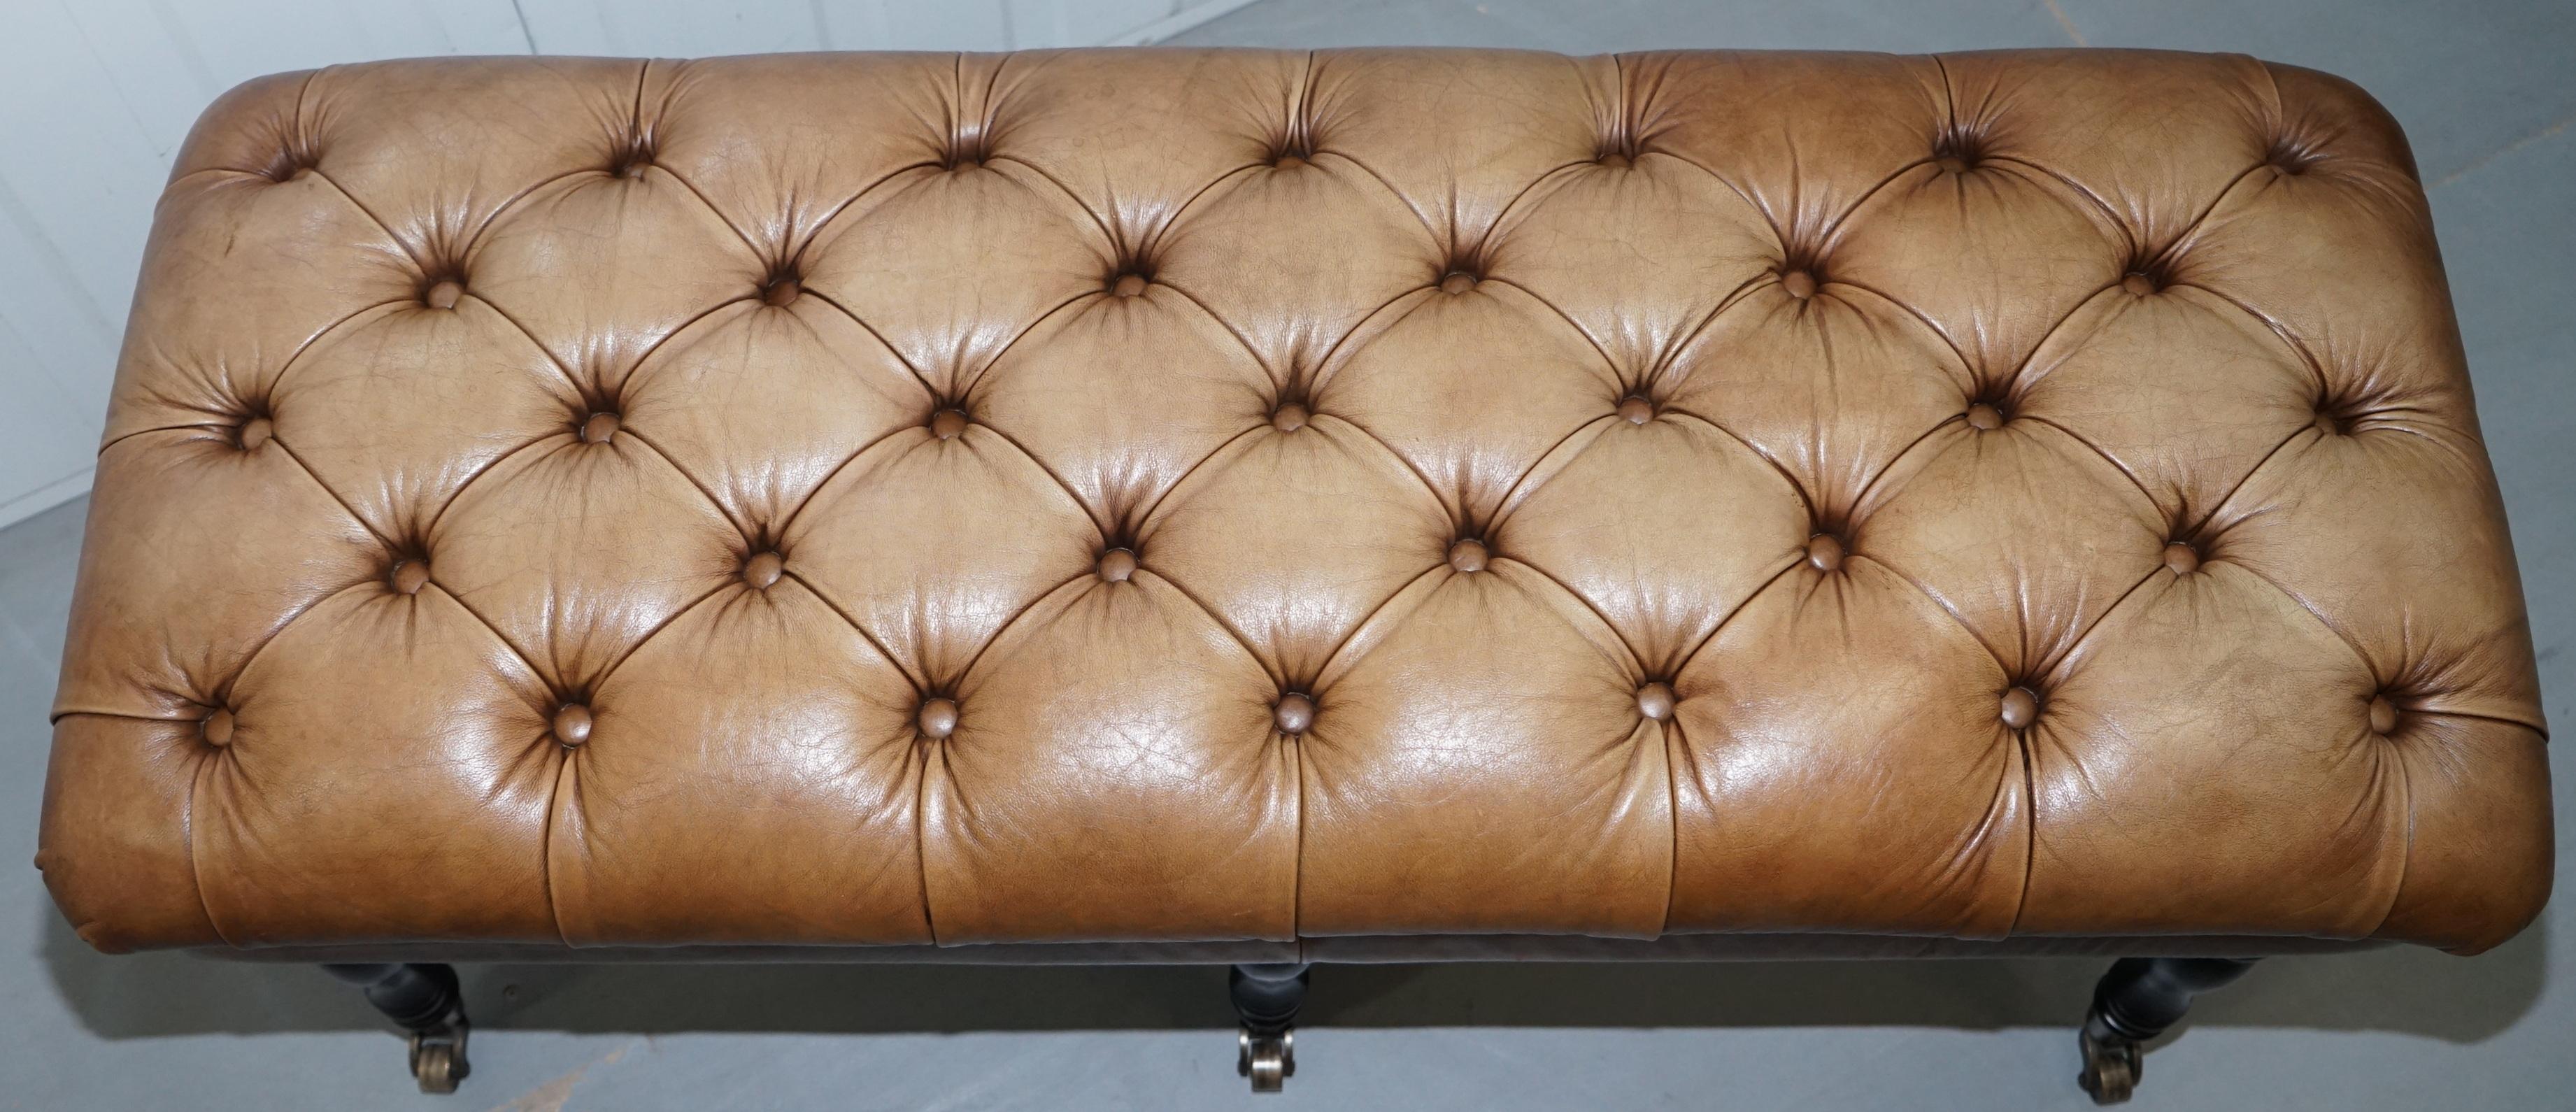 Modern Chesterfield Aged Tan Brown Leather Chesterfield Bench Stool on Wood Turned Legs